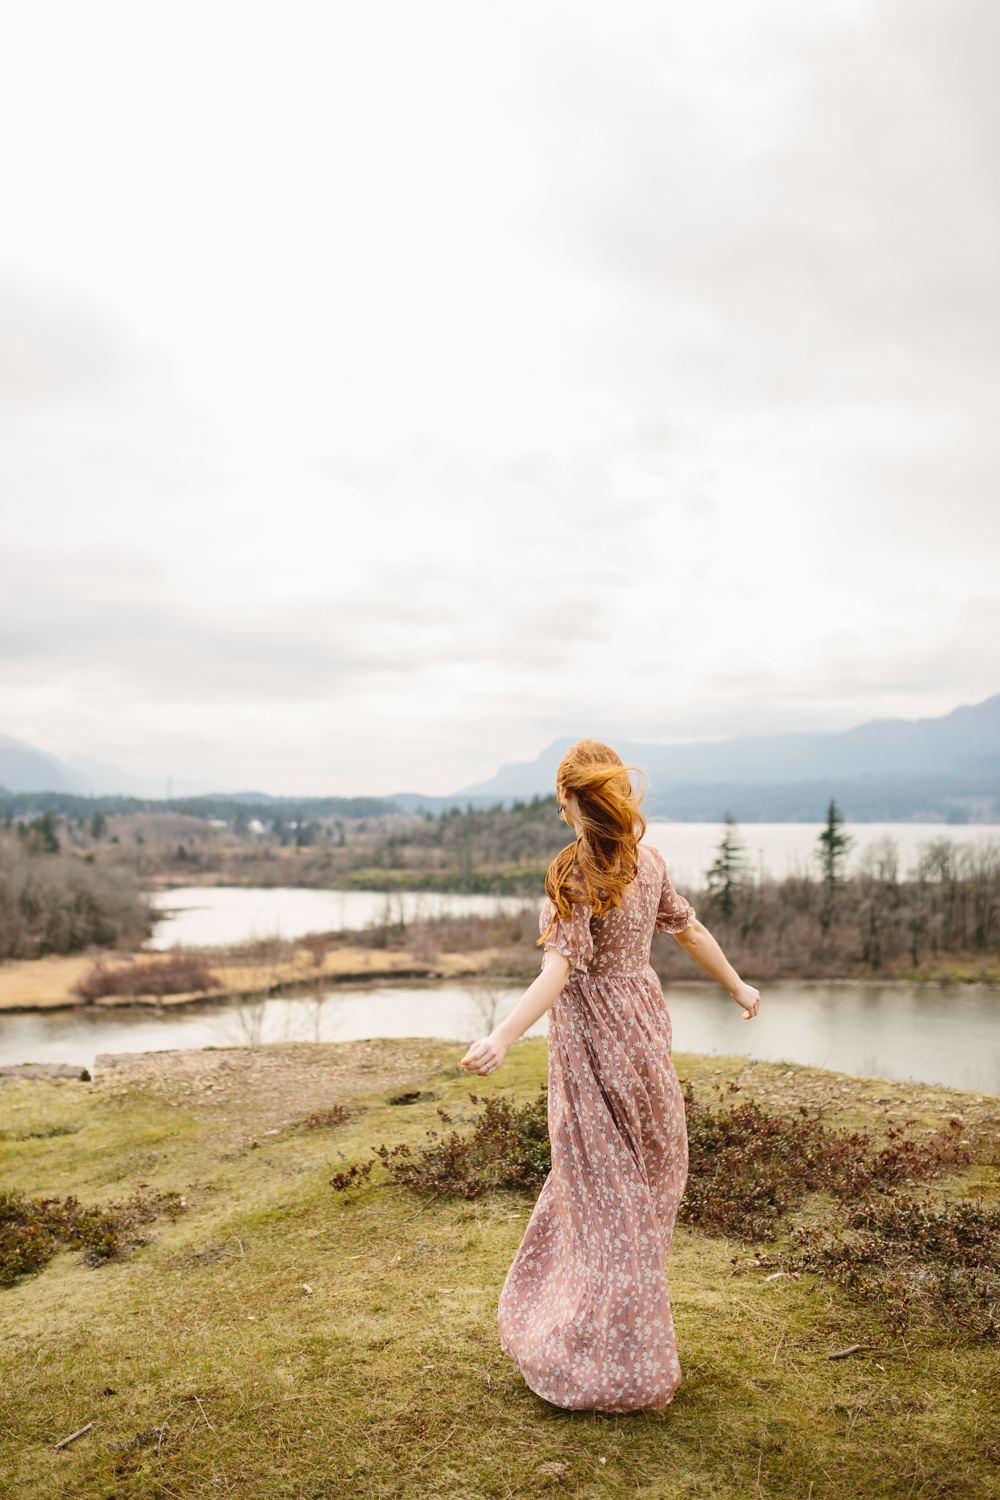 Columbia River Gorge - Portrait of a woman dancing in the wind